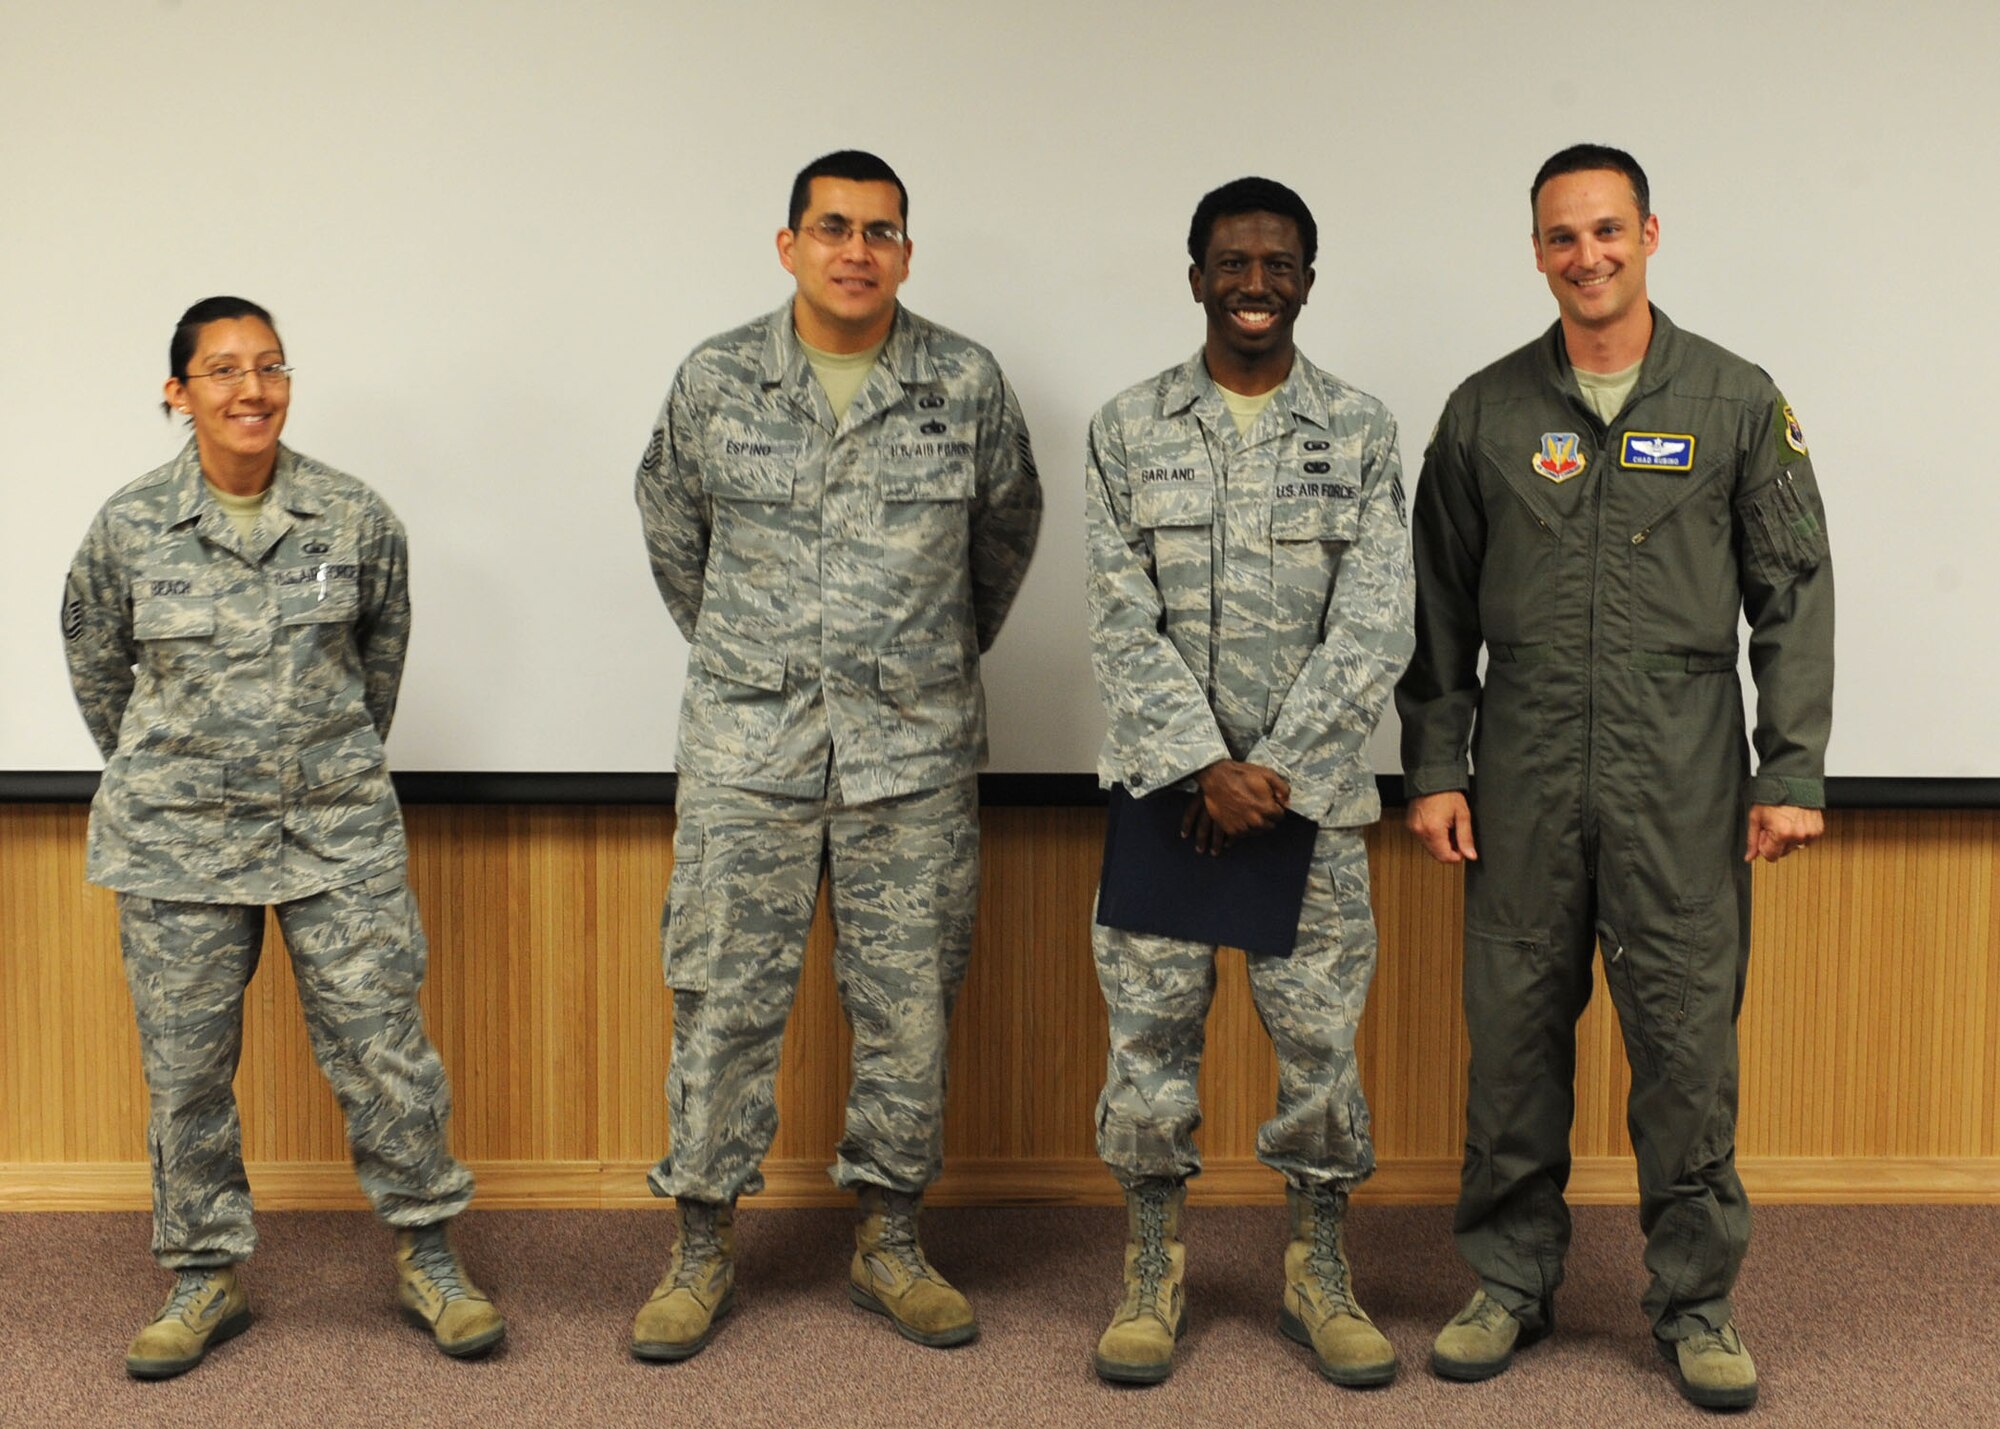 Airmen from the 7th Director of Staff chaplain corps team, receive the 7th DS’s superior performer of the month award from Lt. Col. Chad Rubino, 7th DS commander April 12, 2012, at Dyess Air Force Base, Texas. The chaplain corps team hosted traumatic stress response training and coordinated the visit of the Most Reverend Neal Buckon, Auxiliary Bishop for the Archdiocese for the Military Services. (U.S. Air Force photo by Airman 1st Class Peter Thompson/ Released)  